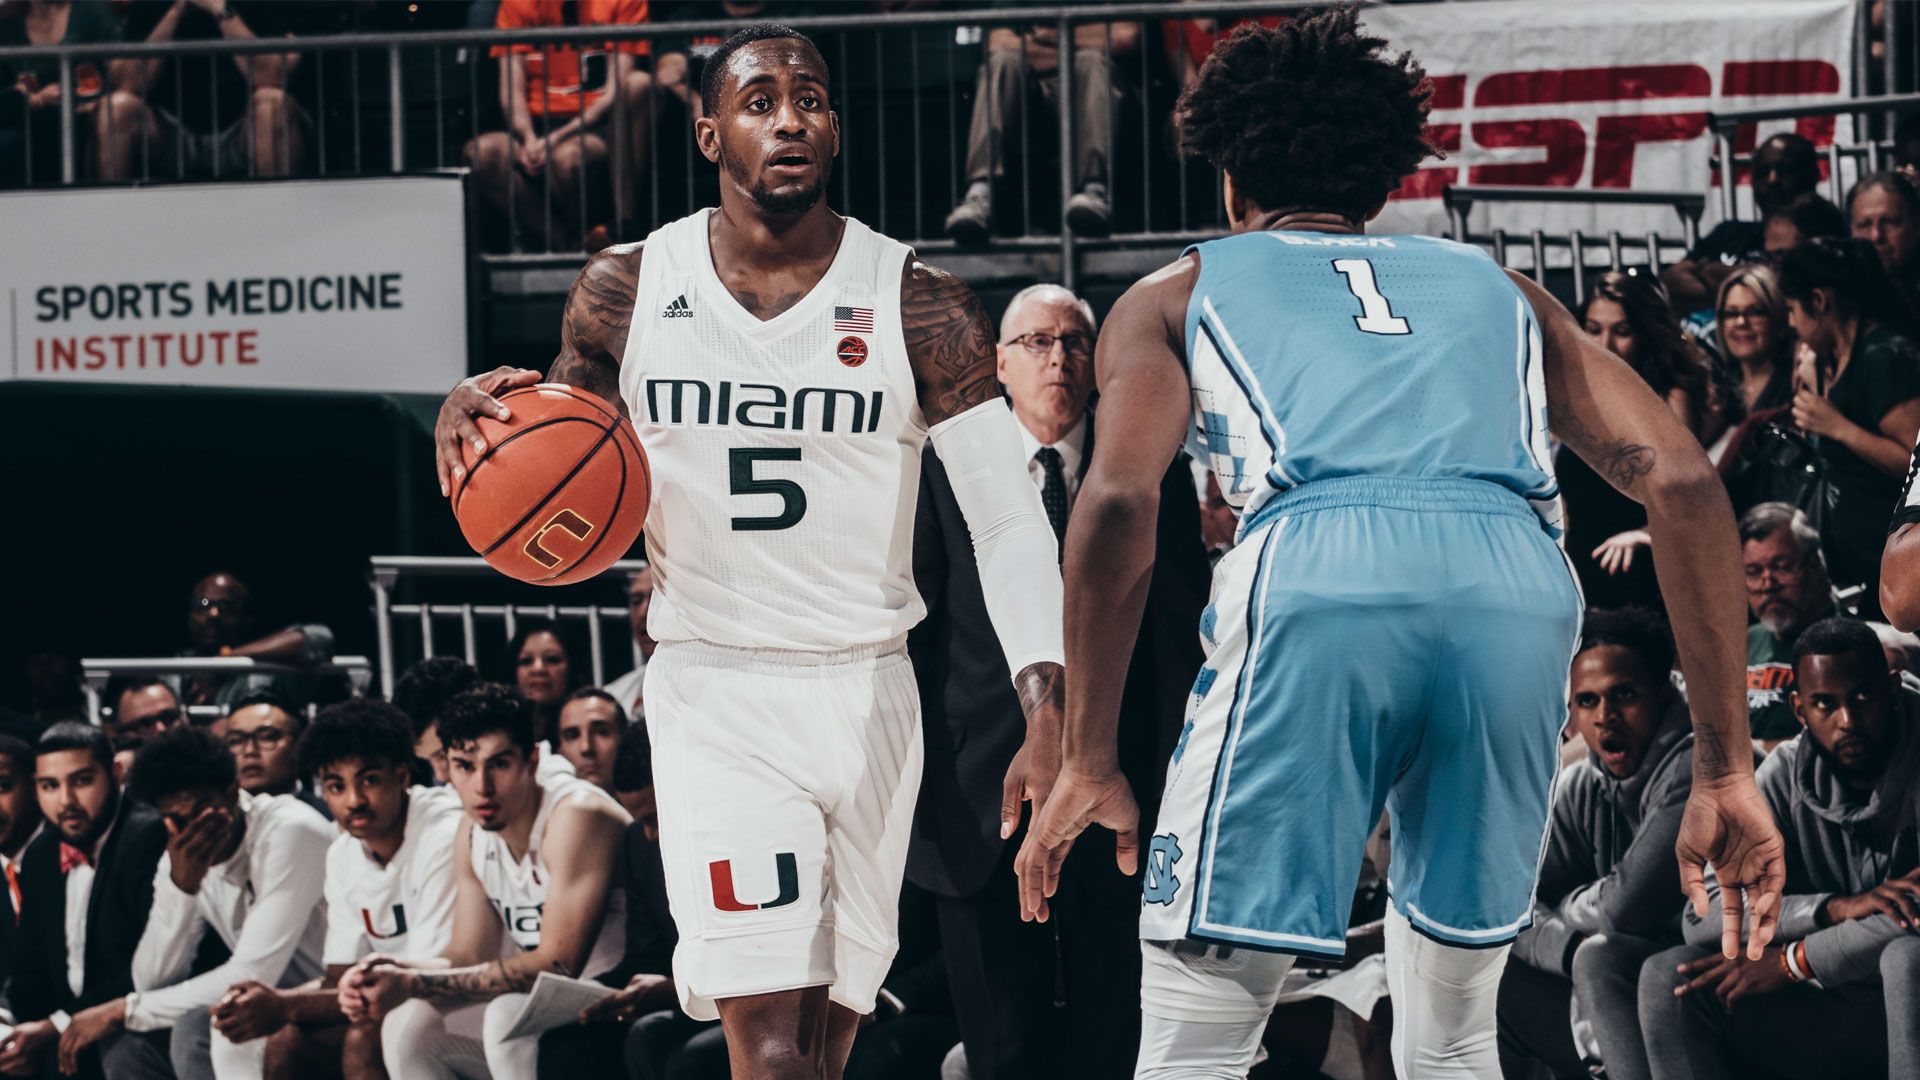 Canes Fall to No. 13 UNC, 85-76